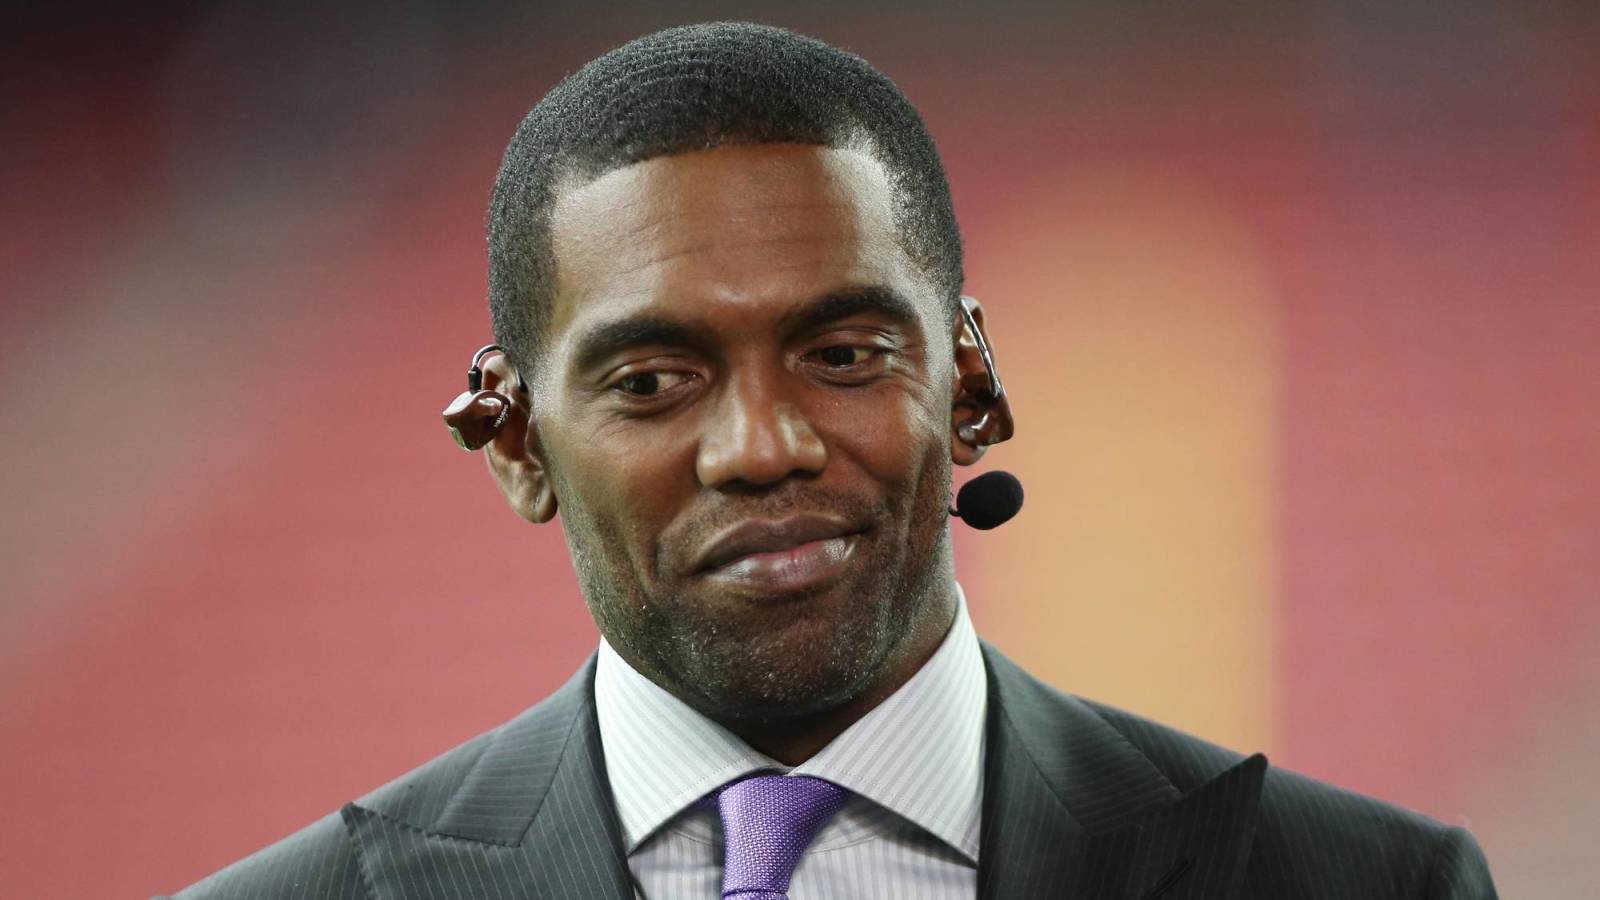 Randy Moss tells the full story that led to the famous fake moon